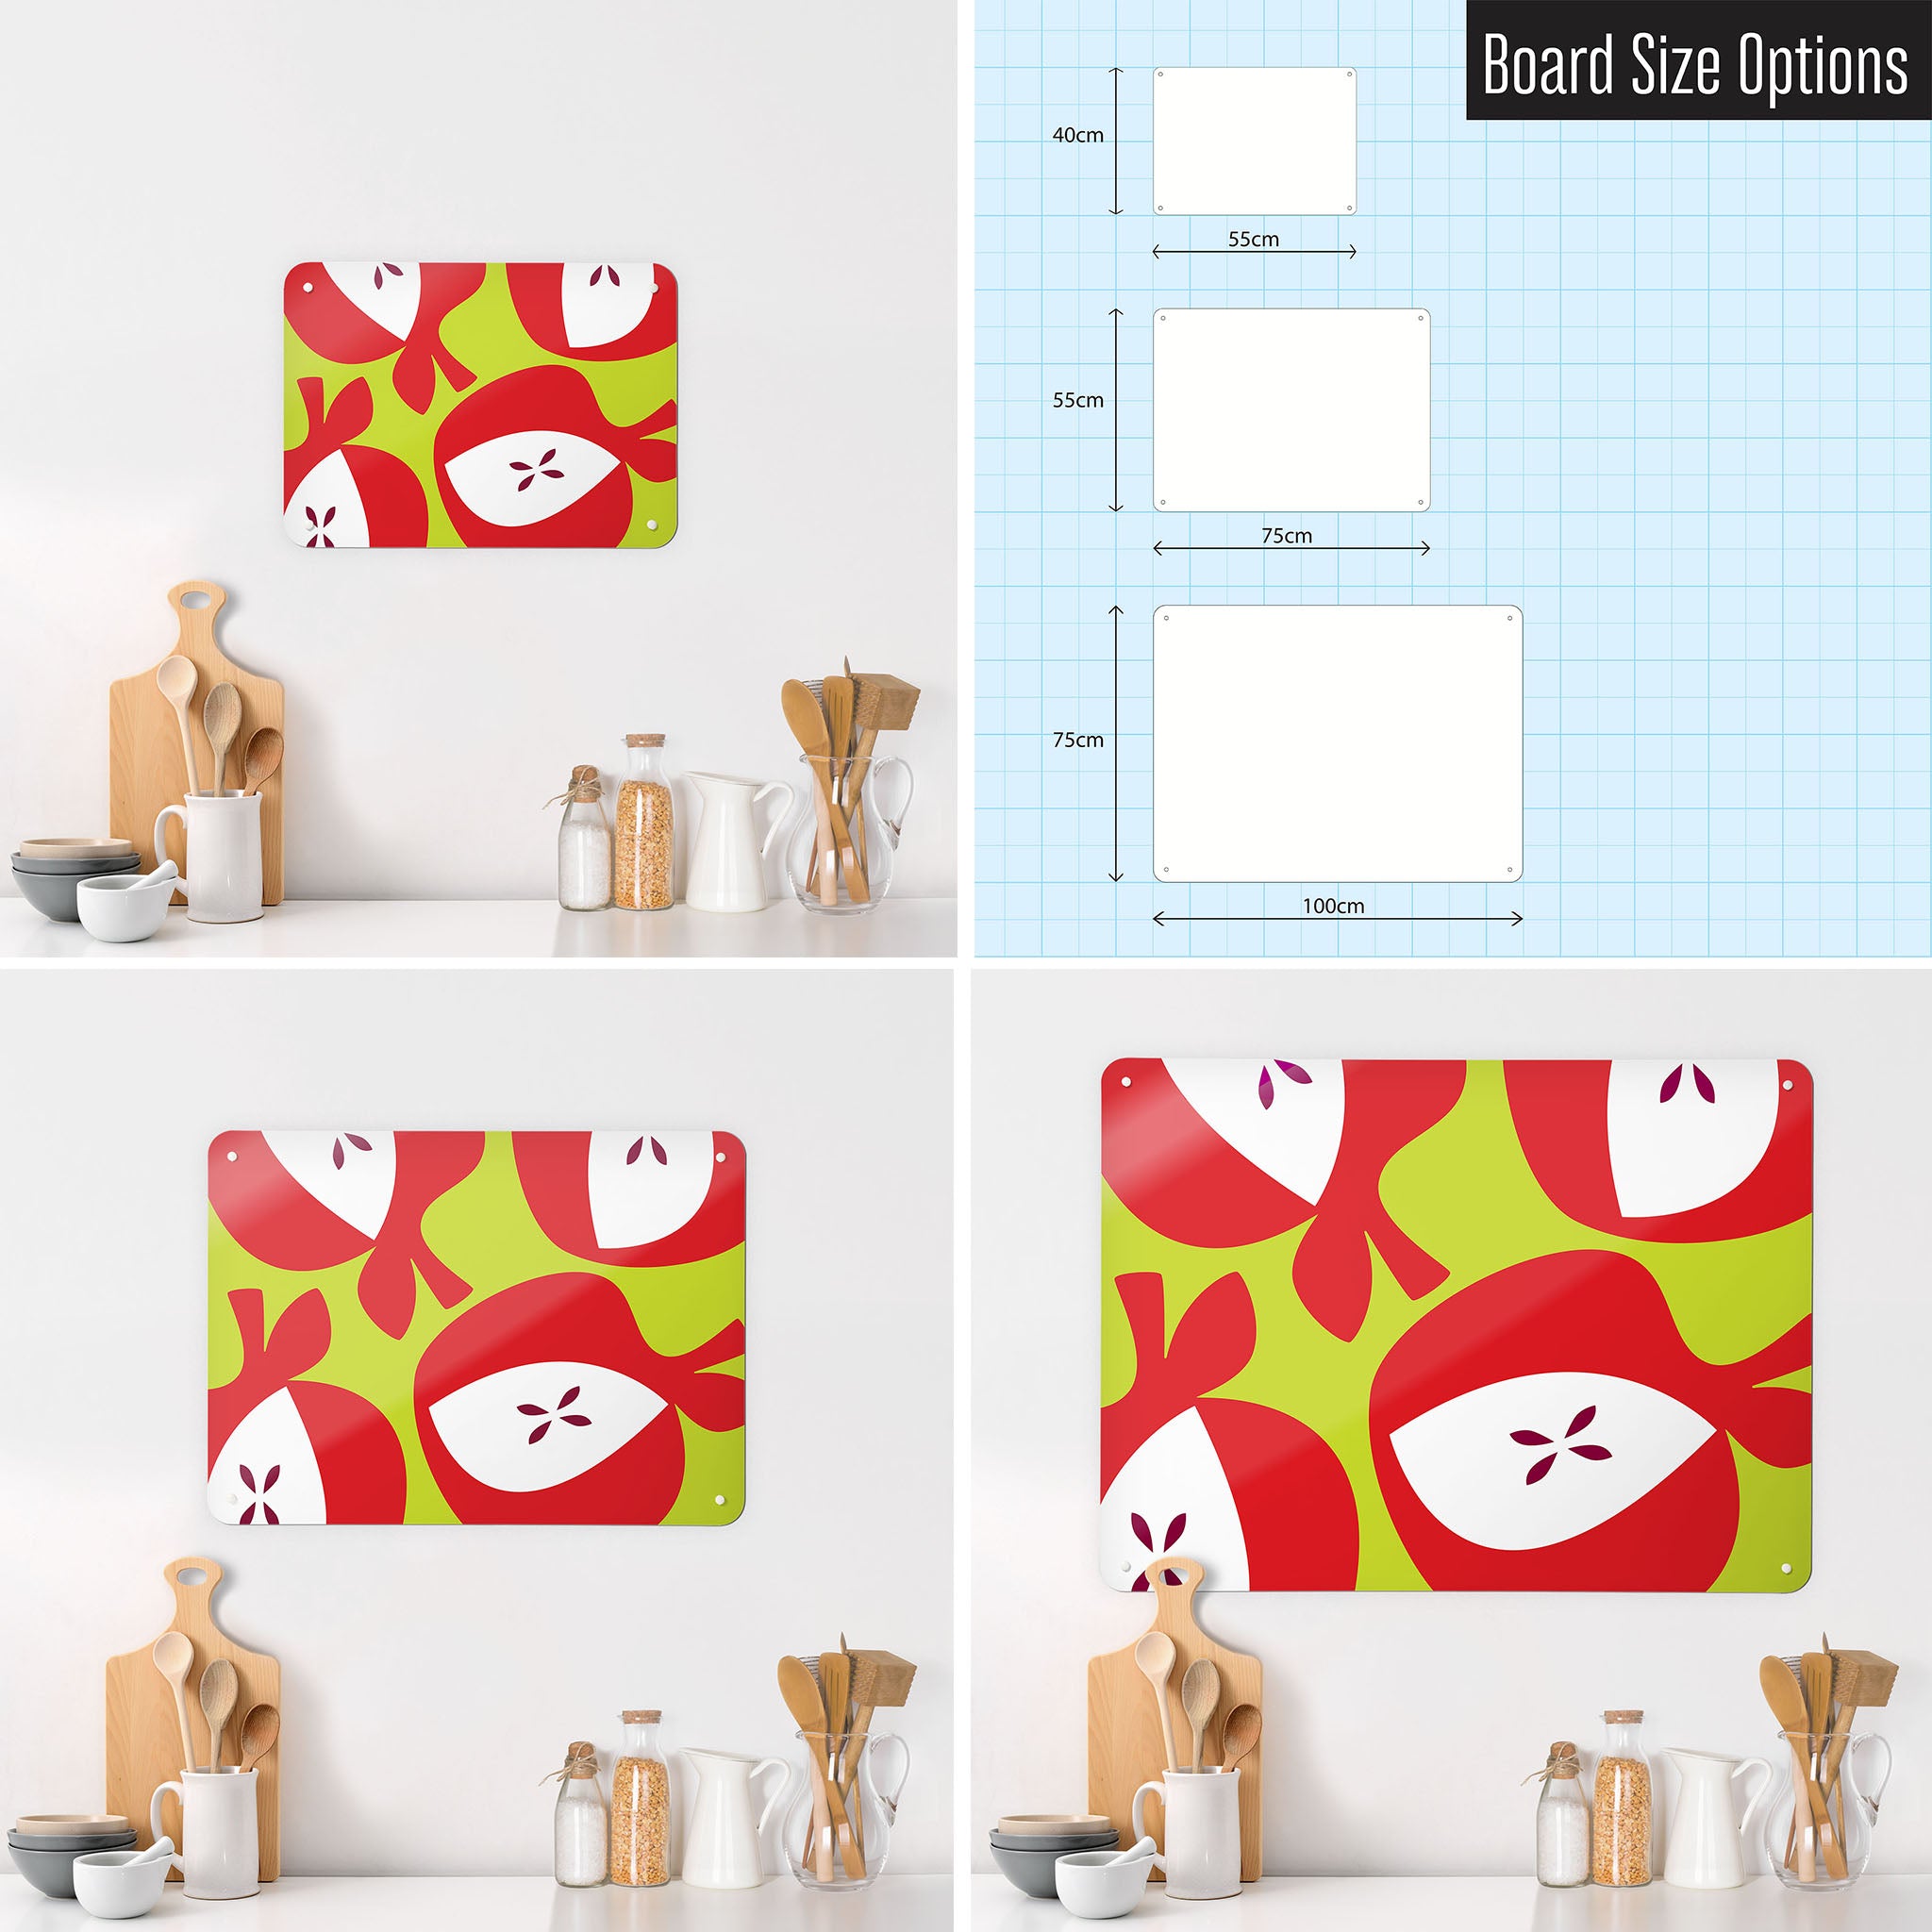 Three photographs of a workspace interior and a diagram to show size comparisons of a red apples design magnetic notice board